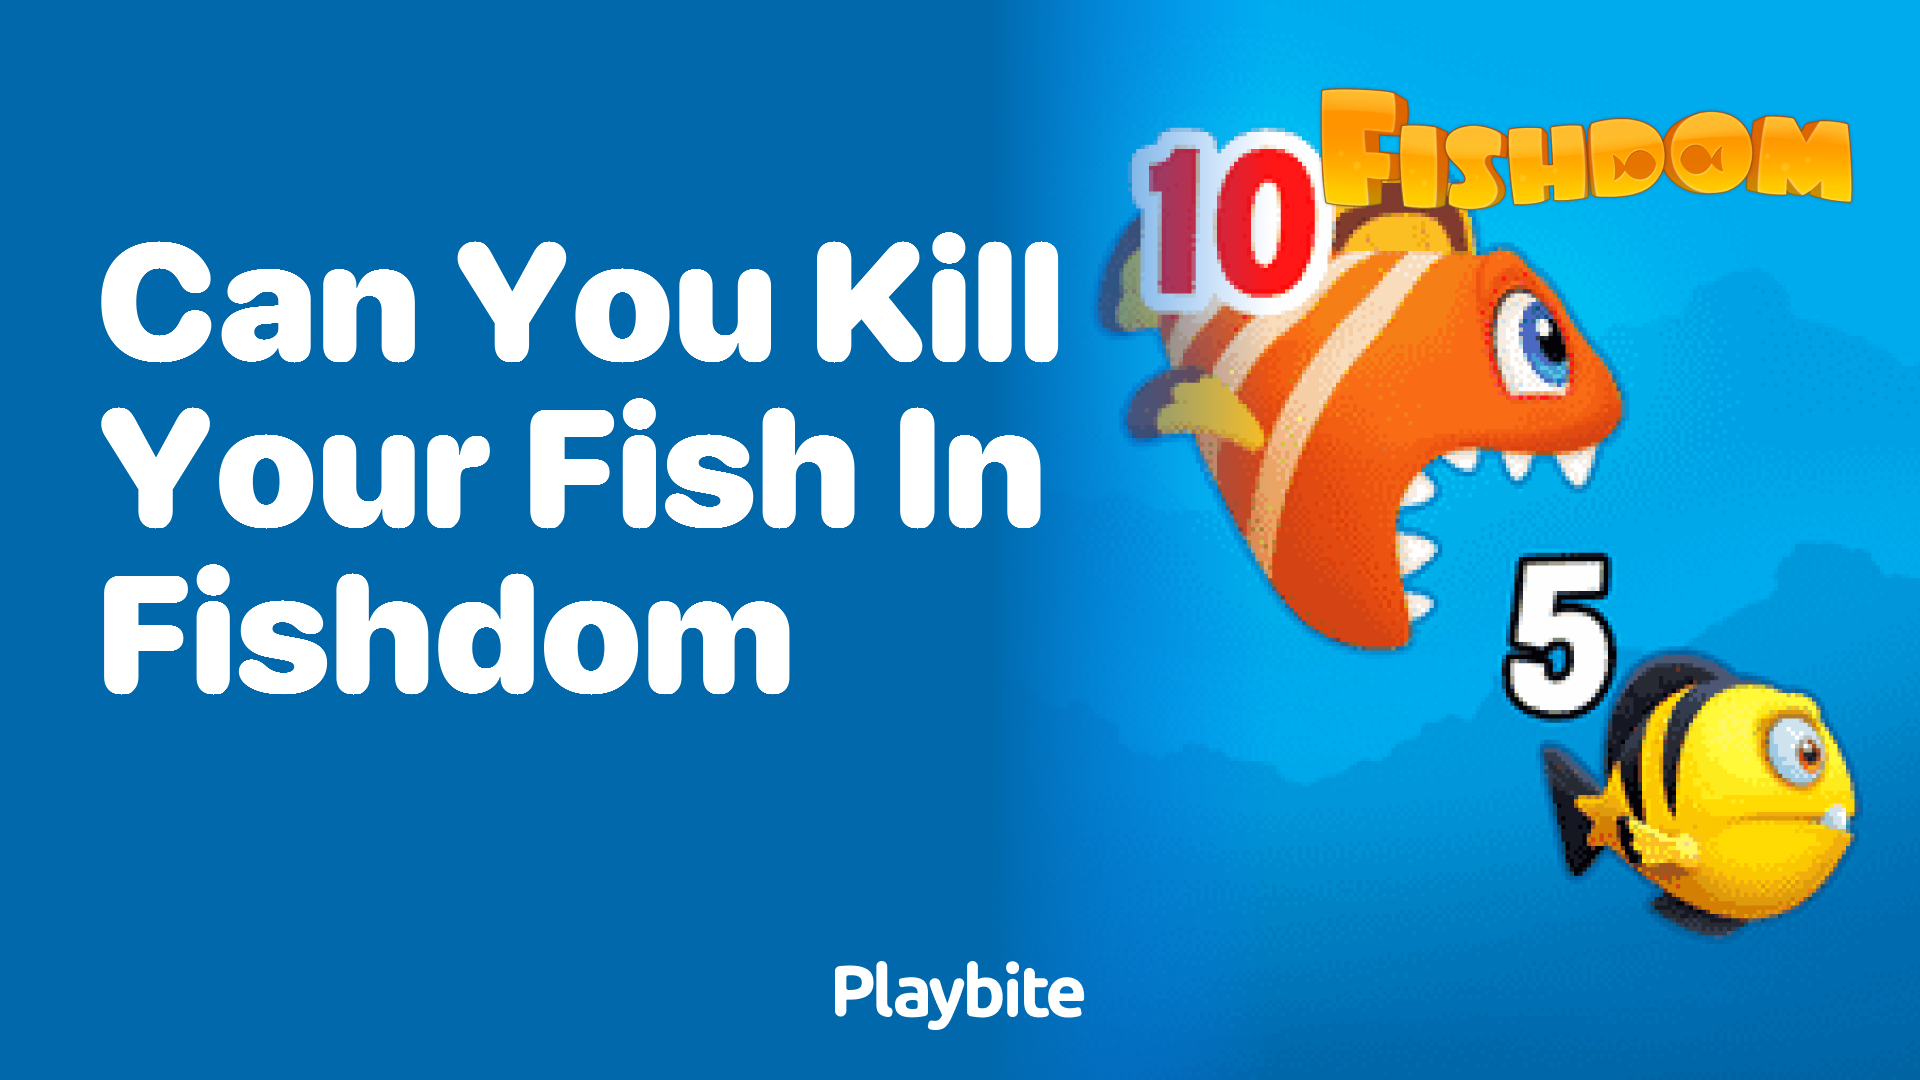 Can You Kill Your Fish in Fishdom?